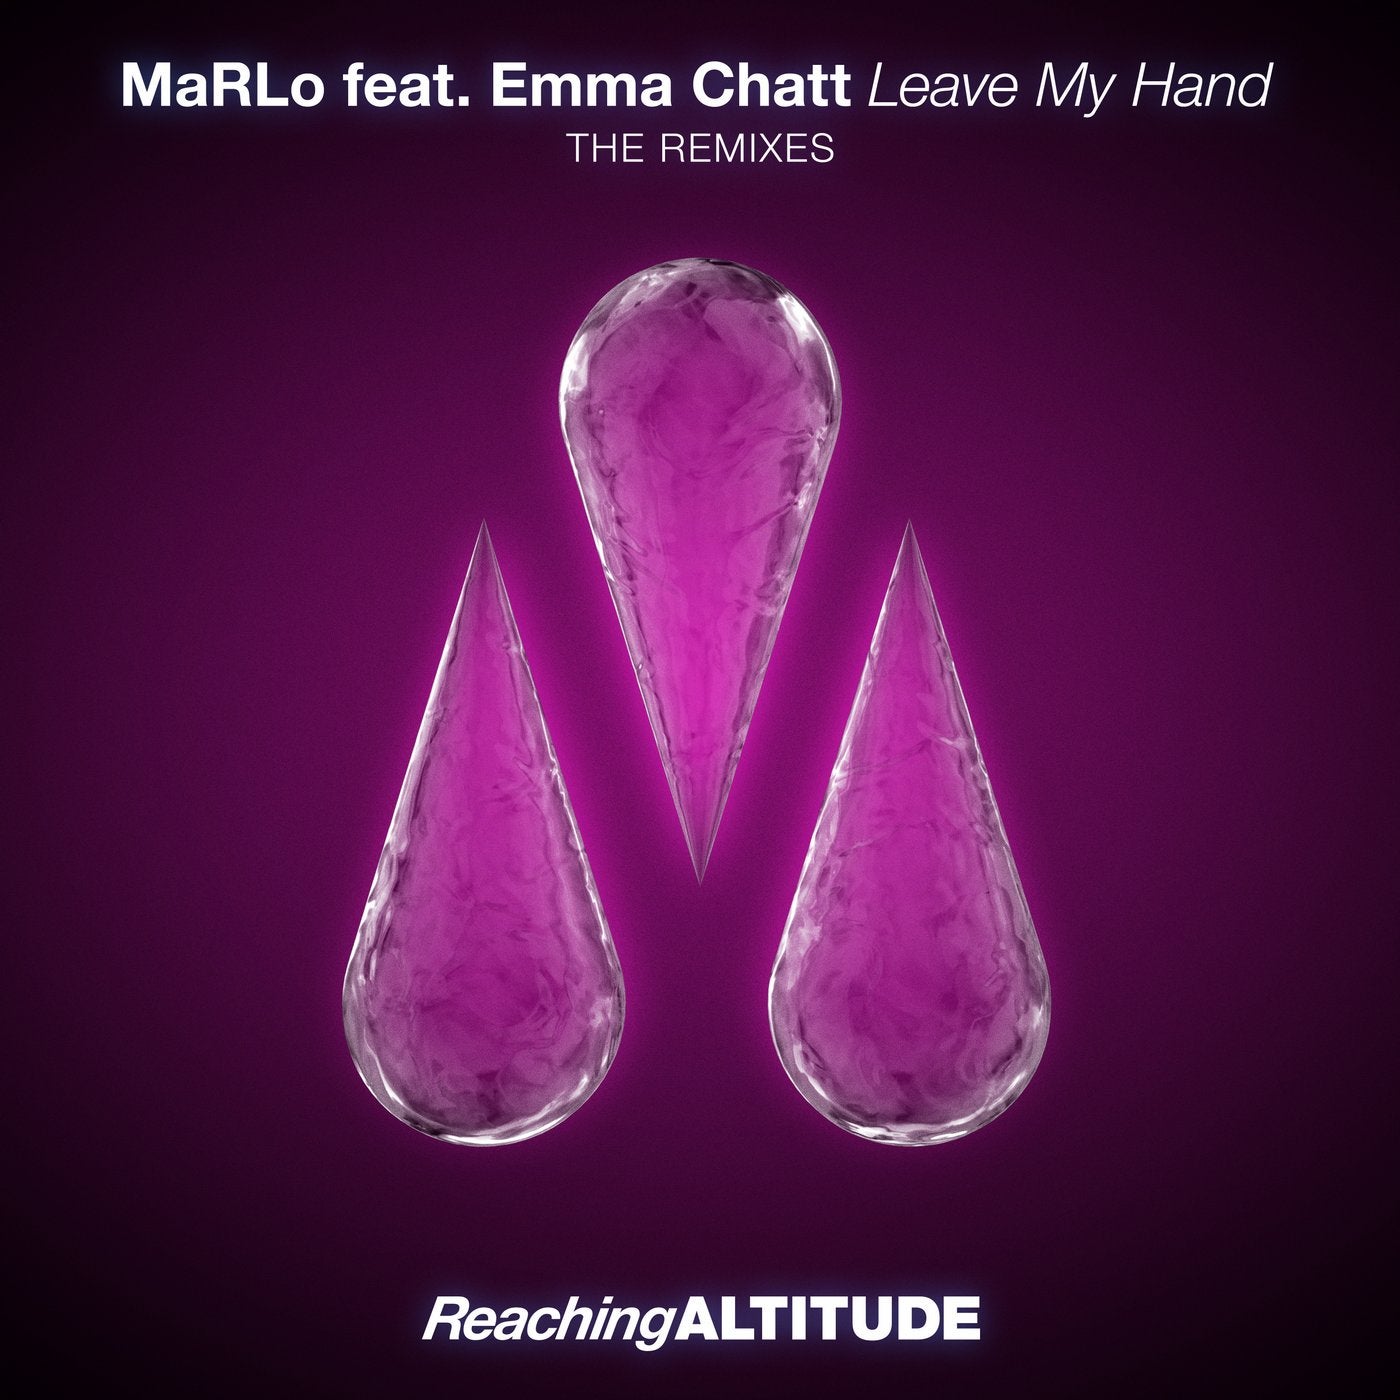 Leave My Hand - The Remixes